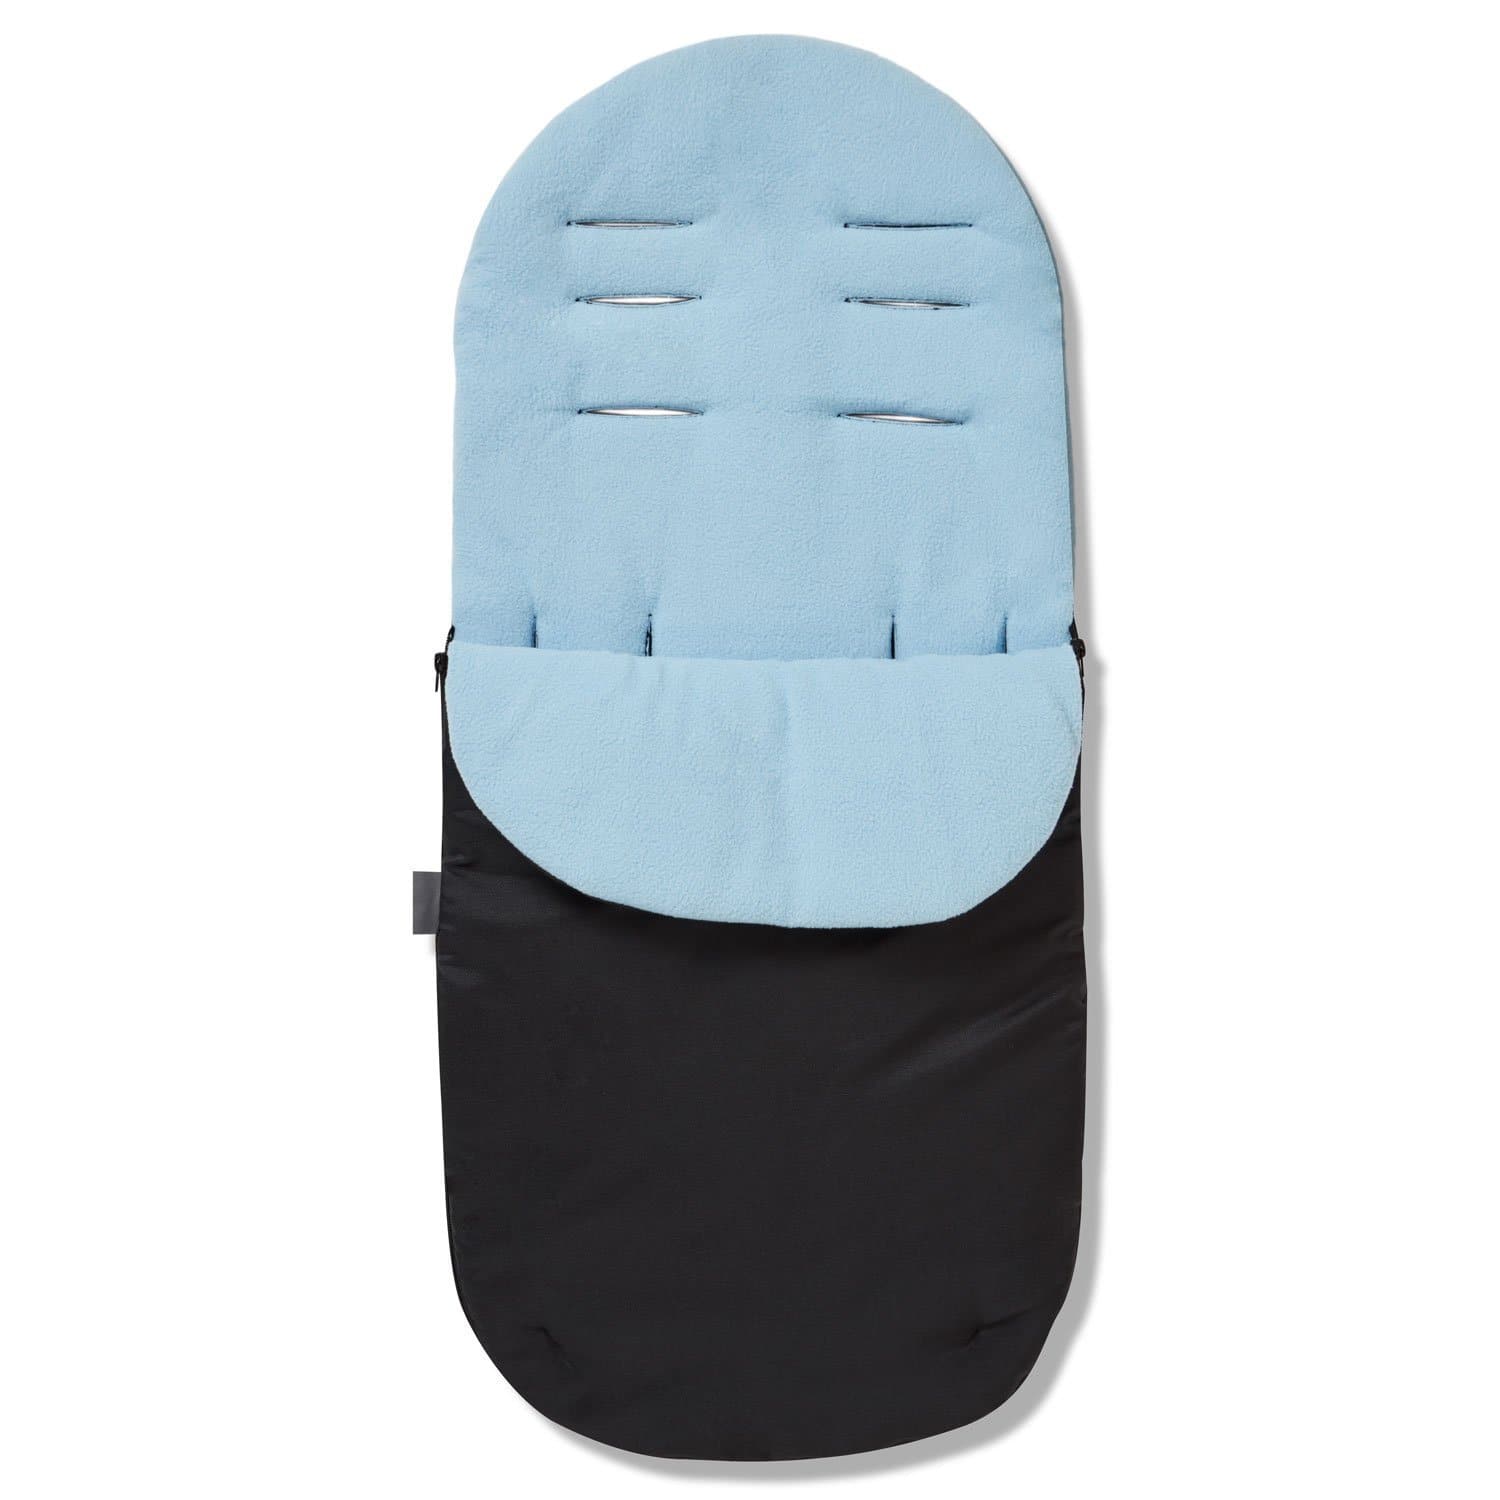 Footmuff / Cosy Toes Compatible with BOB - Light Blue / Fits All Models | For Your Little One